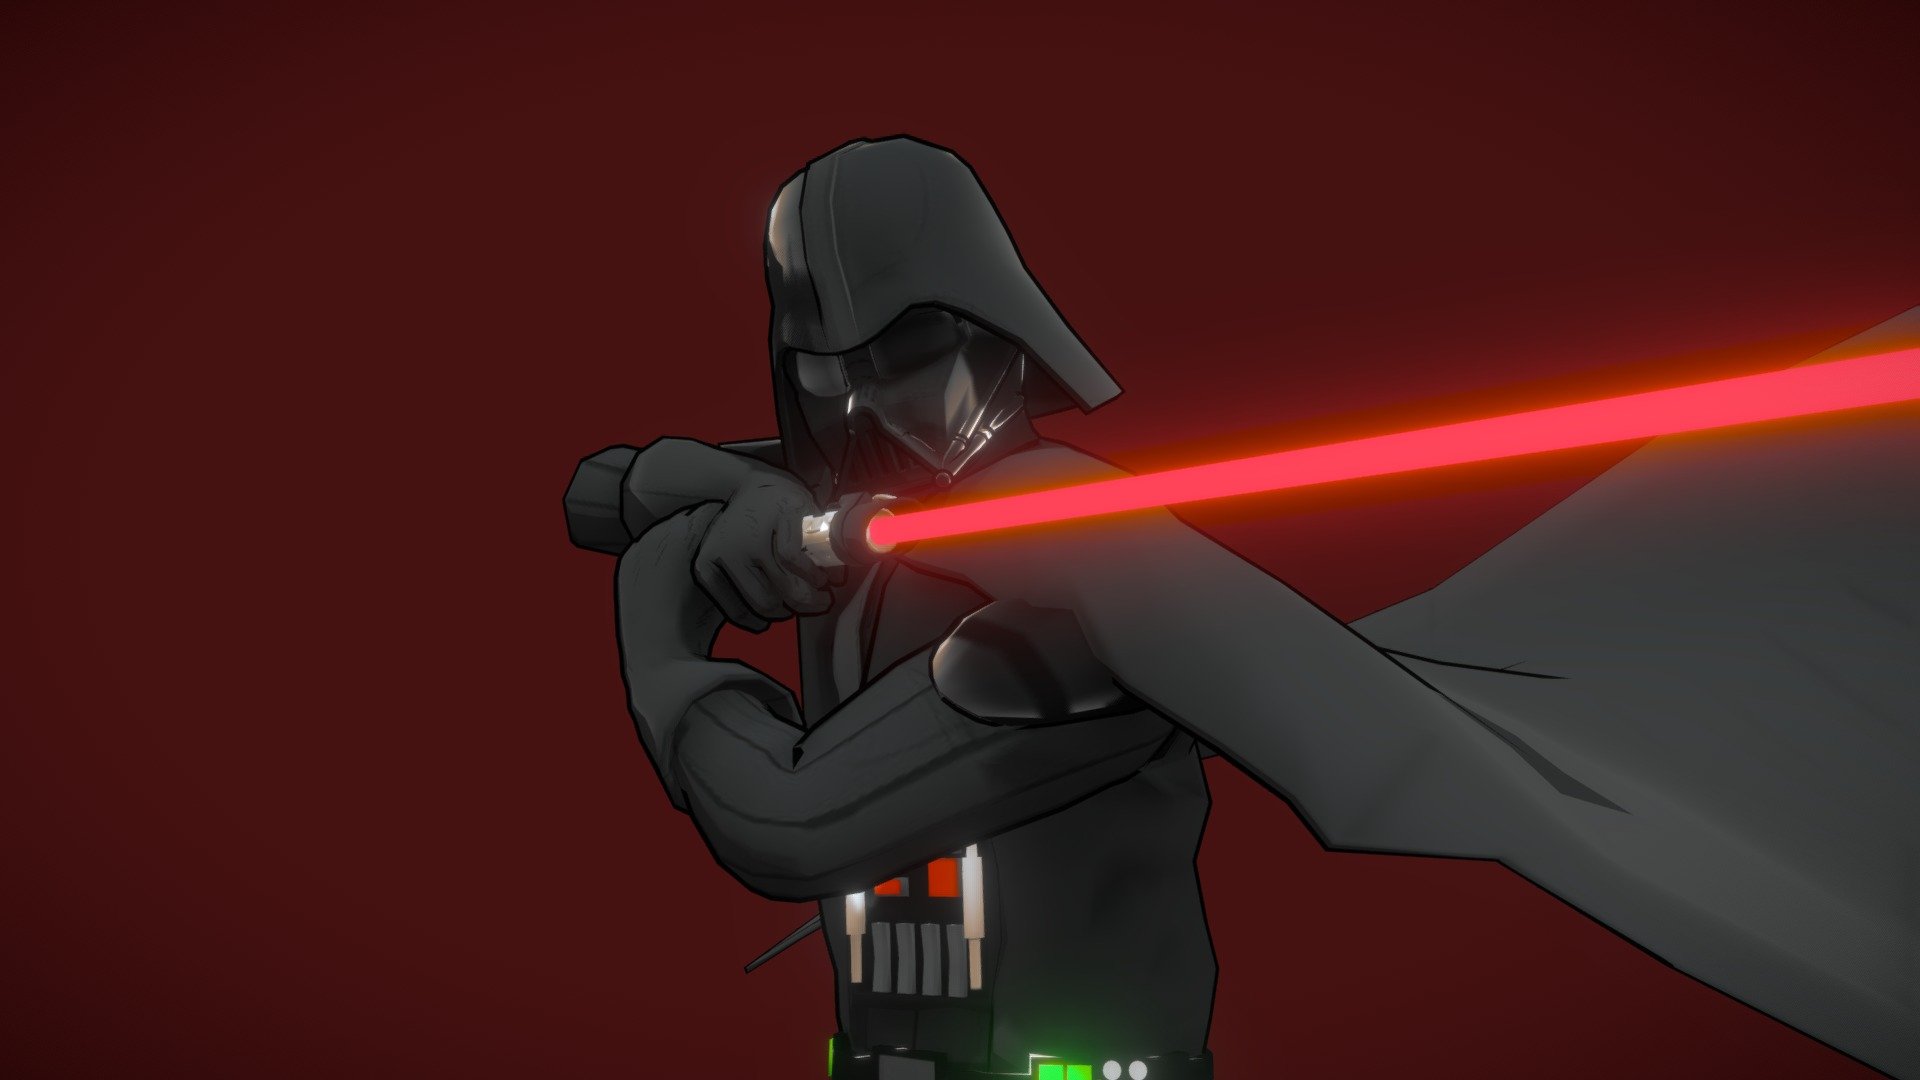 This is a 3D Model of Darth Vader, from Star Wars, created from the ground up, this model is roughly based on the Rebels cartoon version but taking some liberties and trying to make it an anime type of model., using a cell shaded look.

It contains 2 posible versions, one for Rigging and the other one 3D Printing.
This model is part of a yearly collection of 3D Fan Characters I'm doing, this is part of Month 3 of said collection, if you want to check out the timelapse of this model or even see the other characters I'll be making, you can do so in my social media!

Timelapse: https://www.youtube.com/watch?v=bIvINdAD0pw

Rigged Version Features

This version contains the Model, Textures and obviously the rig (duh). Aswell as Vader's Lightsaber as his weapon. More details will be in a PDF of this version.

Download the Additional File for the complete version and instructions

3D Printable Version

If you wish to buy the 3D Printable version, you can do here.

https://skfb.ly/o8tTM - Darth Vader (Star Wars) - Rigged - Buy Royalty Free 3D model by maisth 3d model